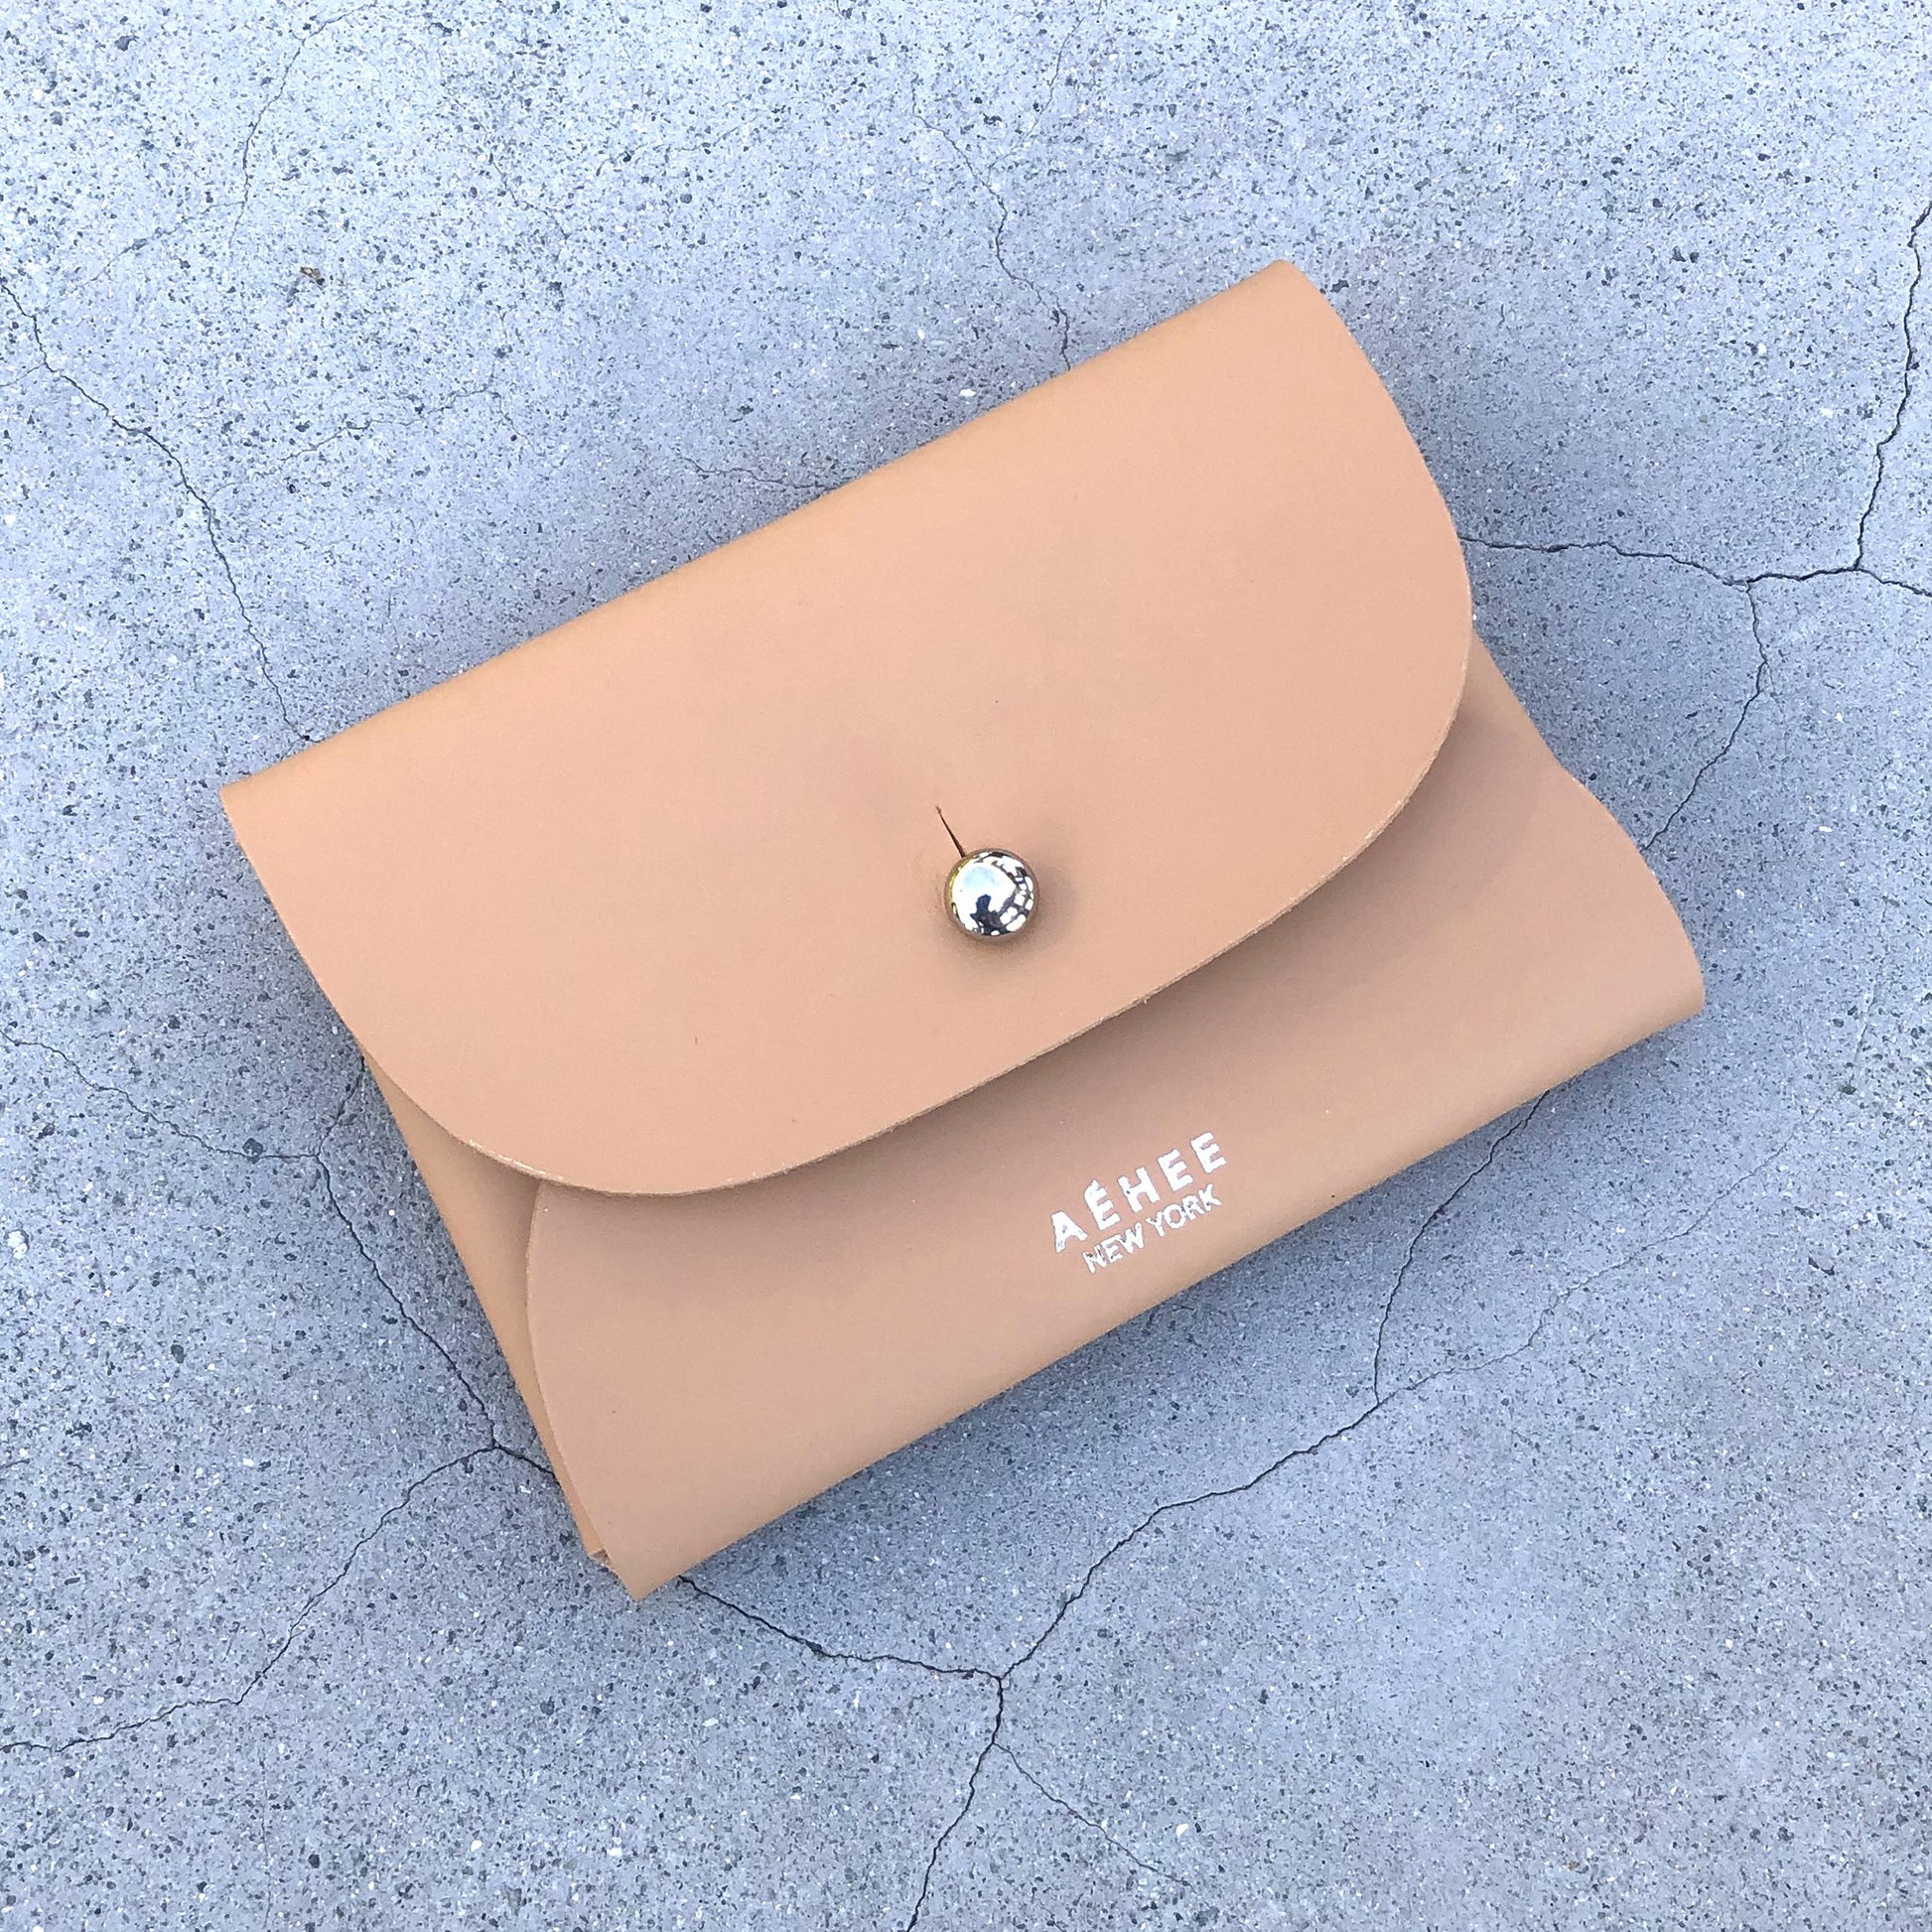 Chic beige cardholder wallet crafted from Italian vegetable tanned leather for a minimal yet sophisticated look.